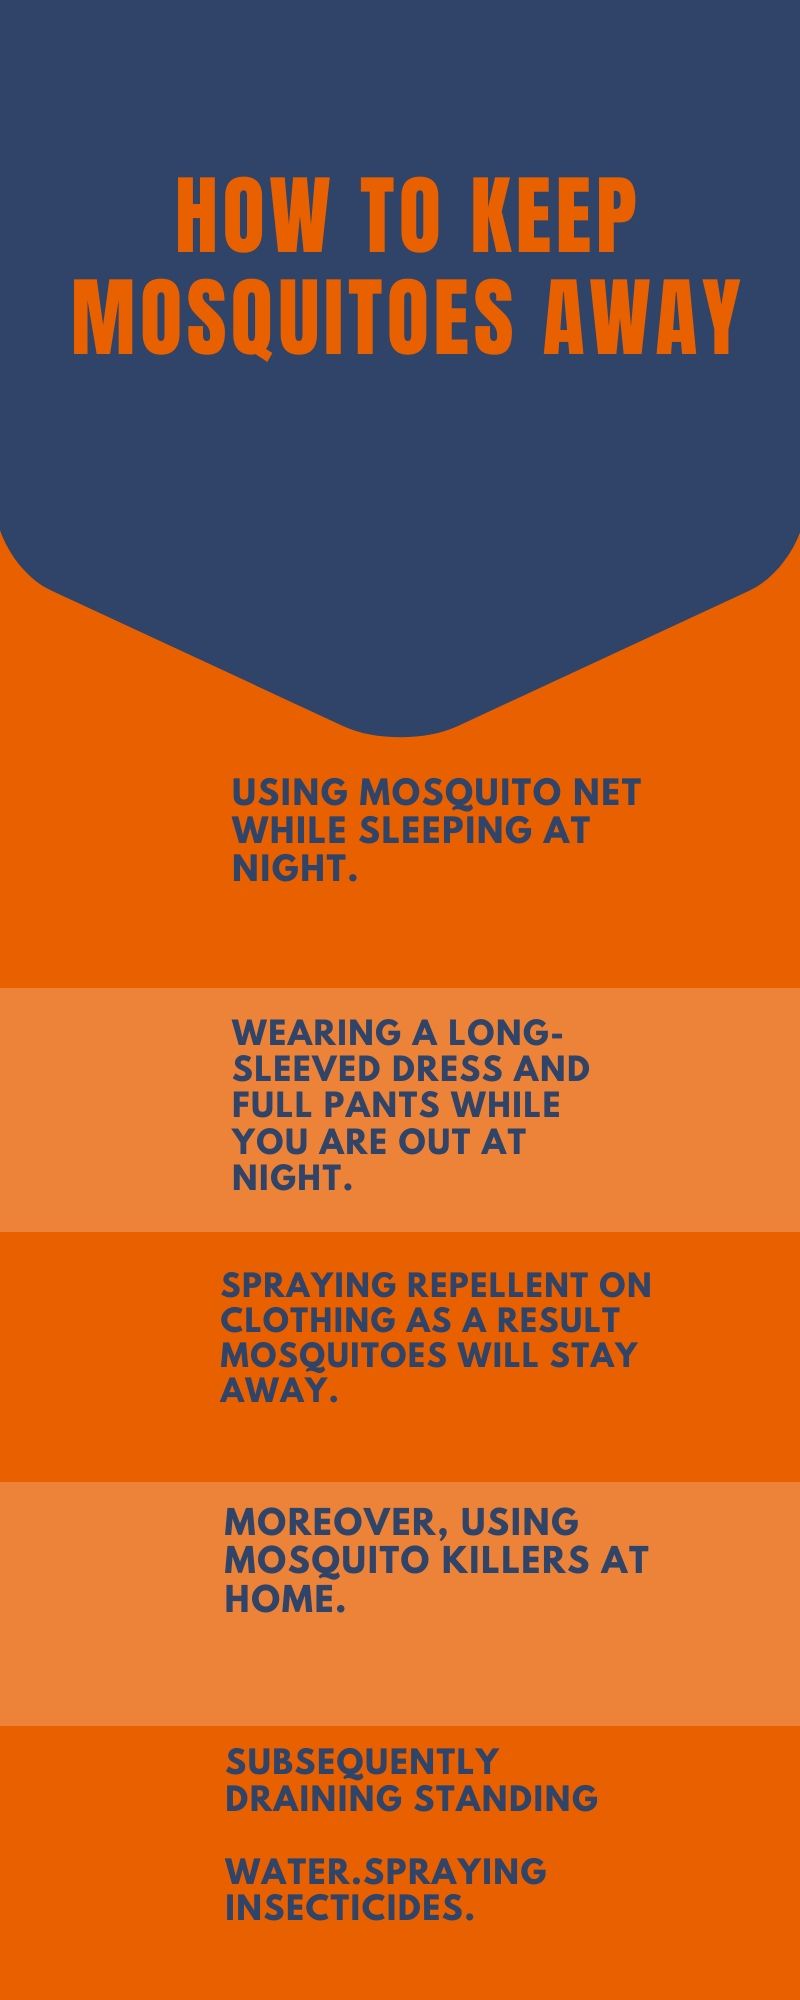 how to keep mosquitoes away info-graphics